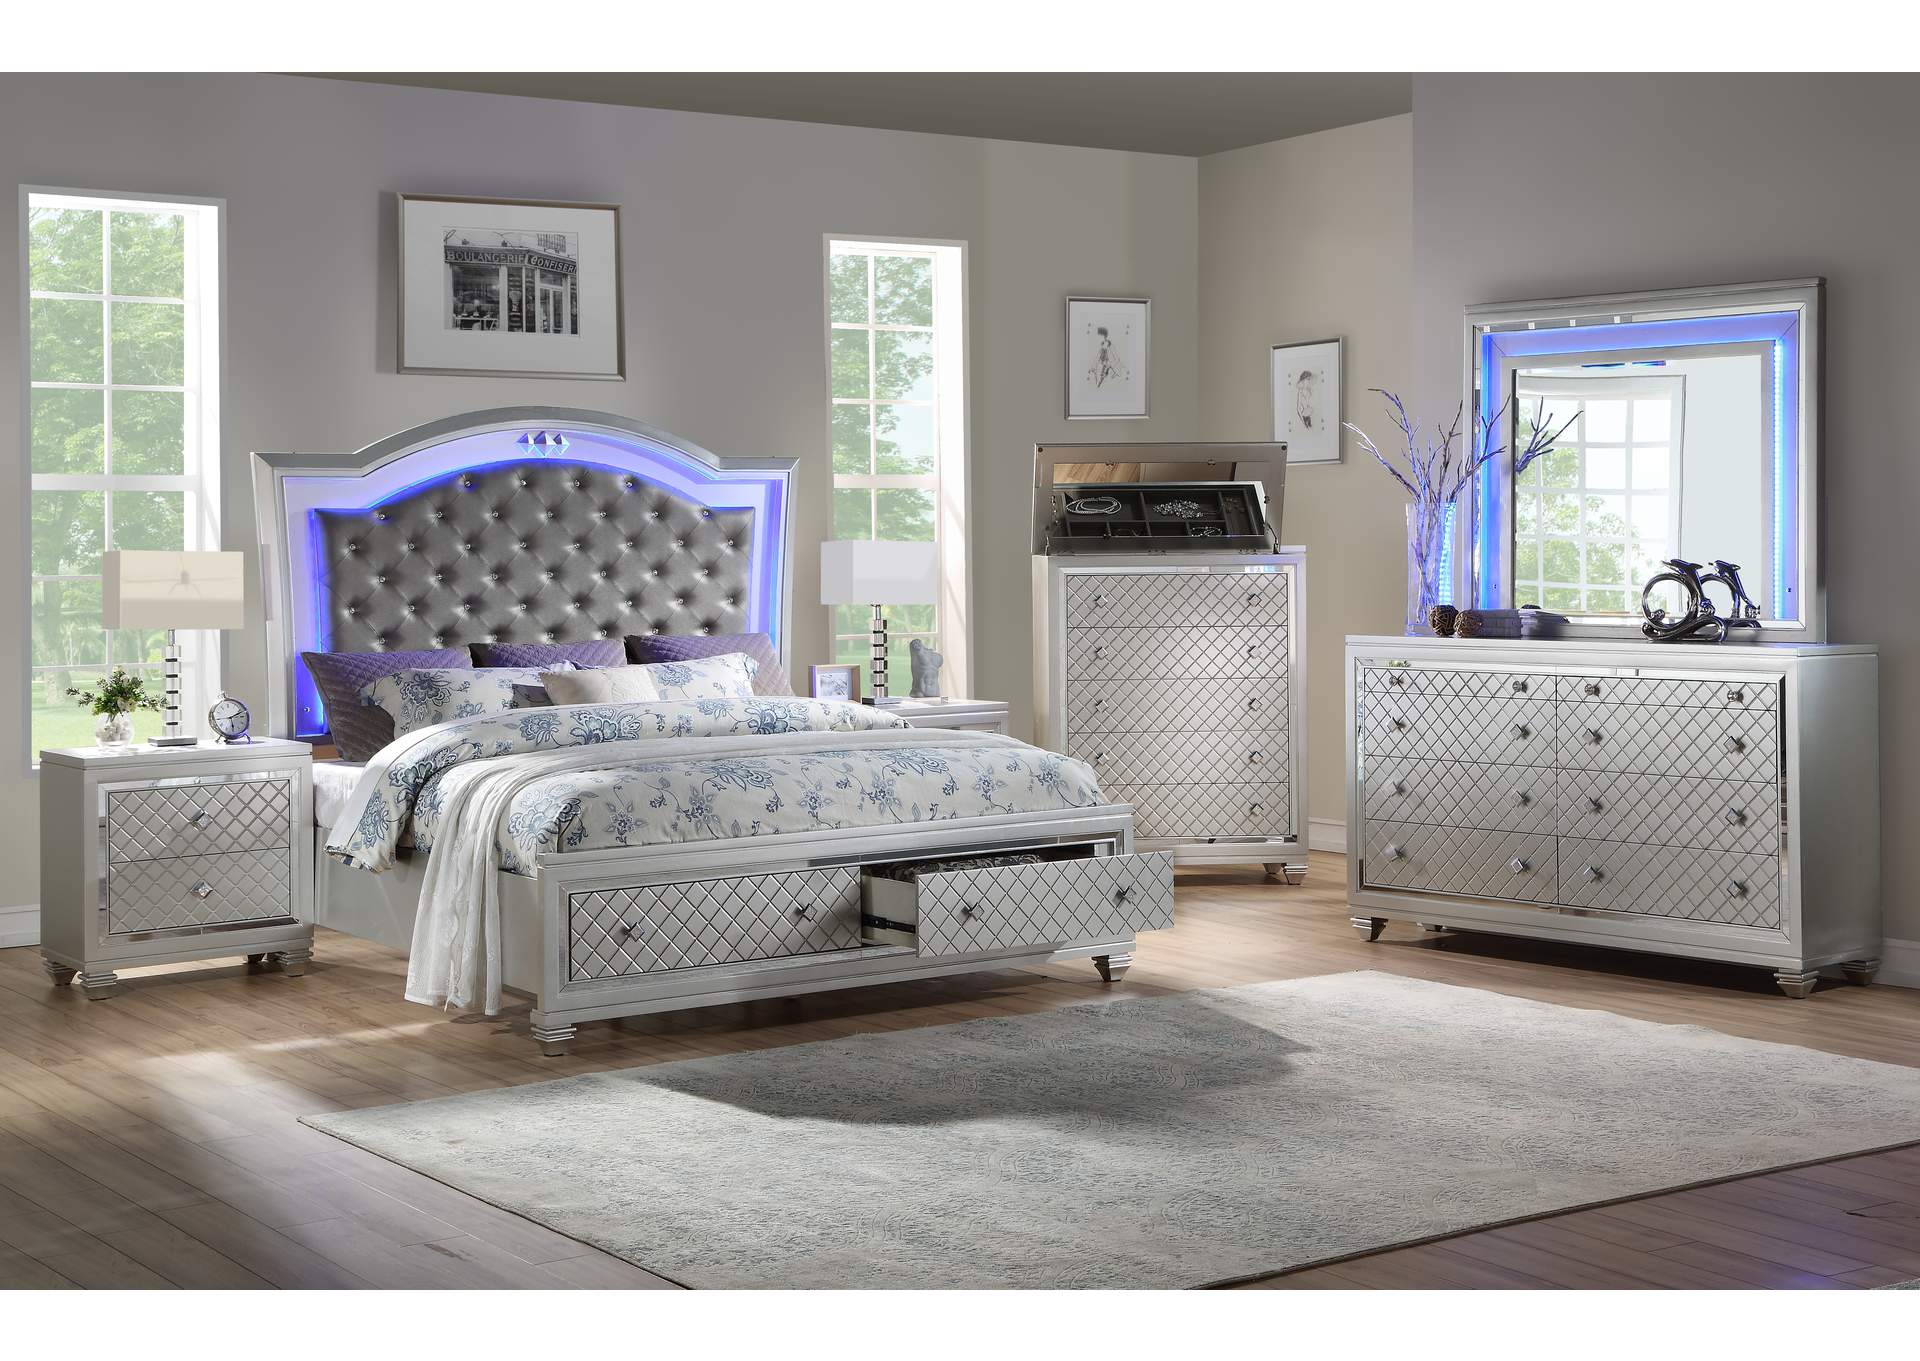 Shiney Silver Queen Bedroom Set Bed, Silver Dresser With Mirror And Nightstand Set Of 2